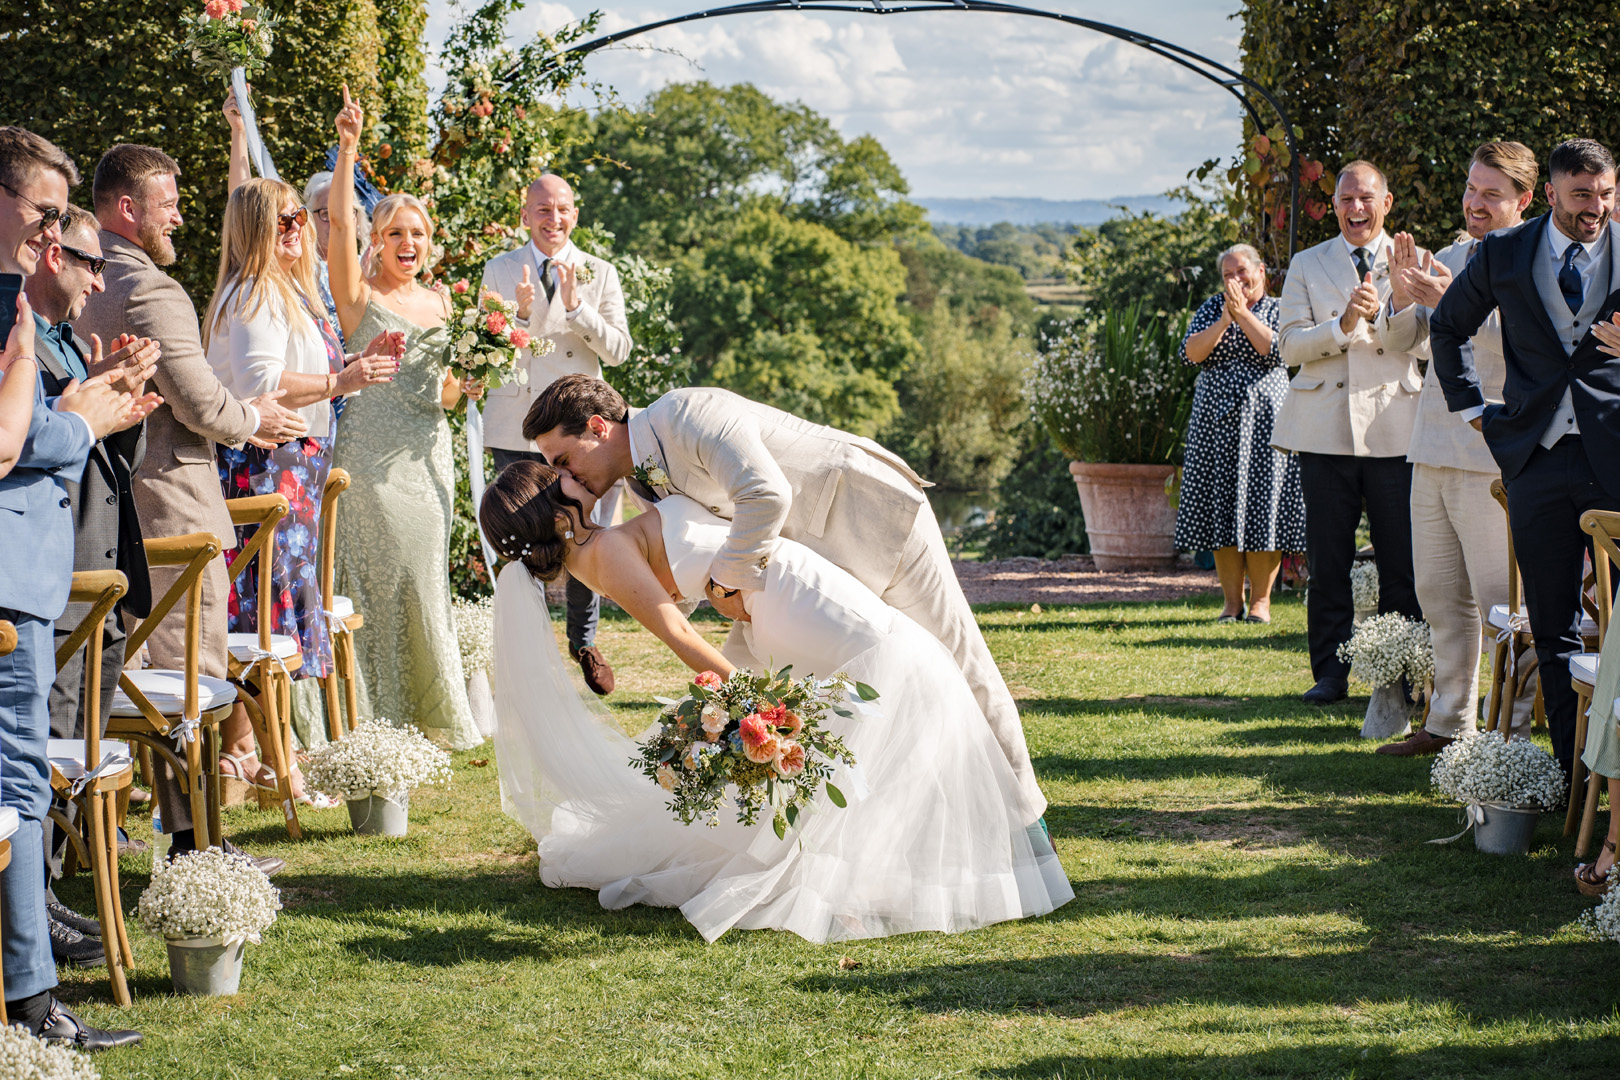 Our romantic and magical gardens at Pauntley Court are the perfect setting